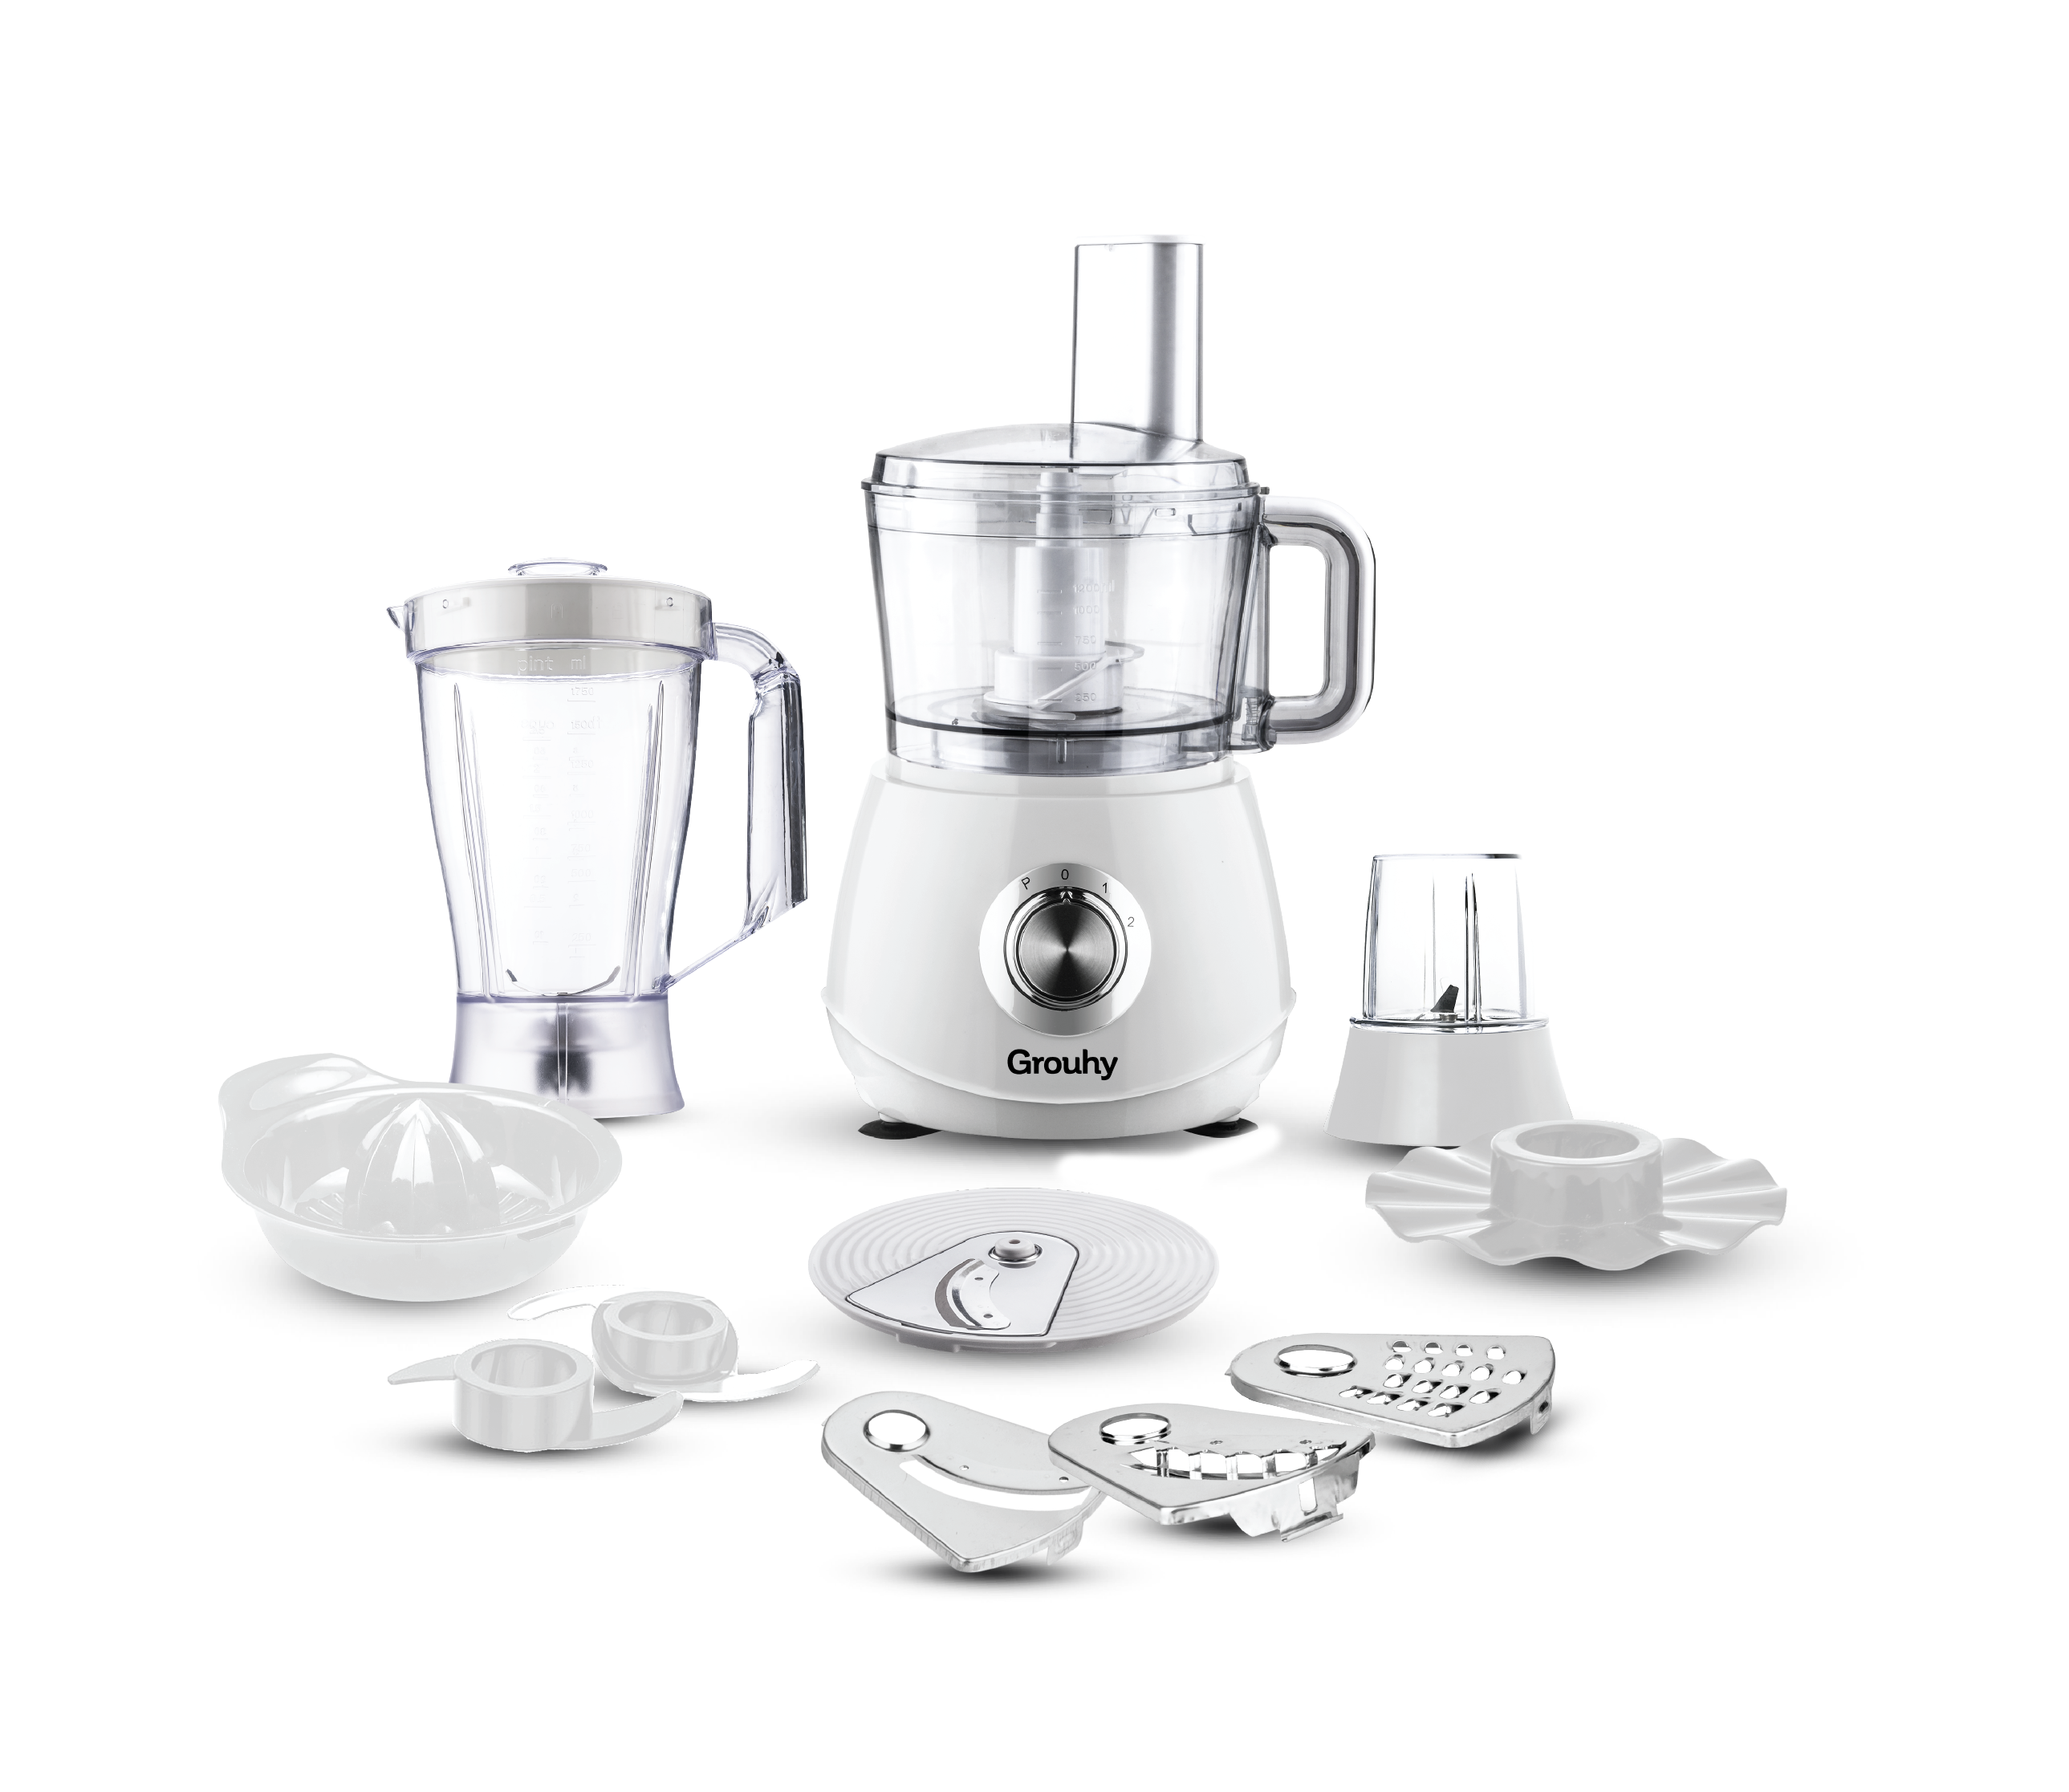 Grouhy GFP1040W Multi Function Food Processor - 1000 W